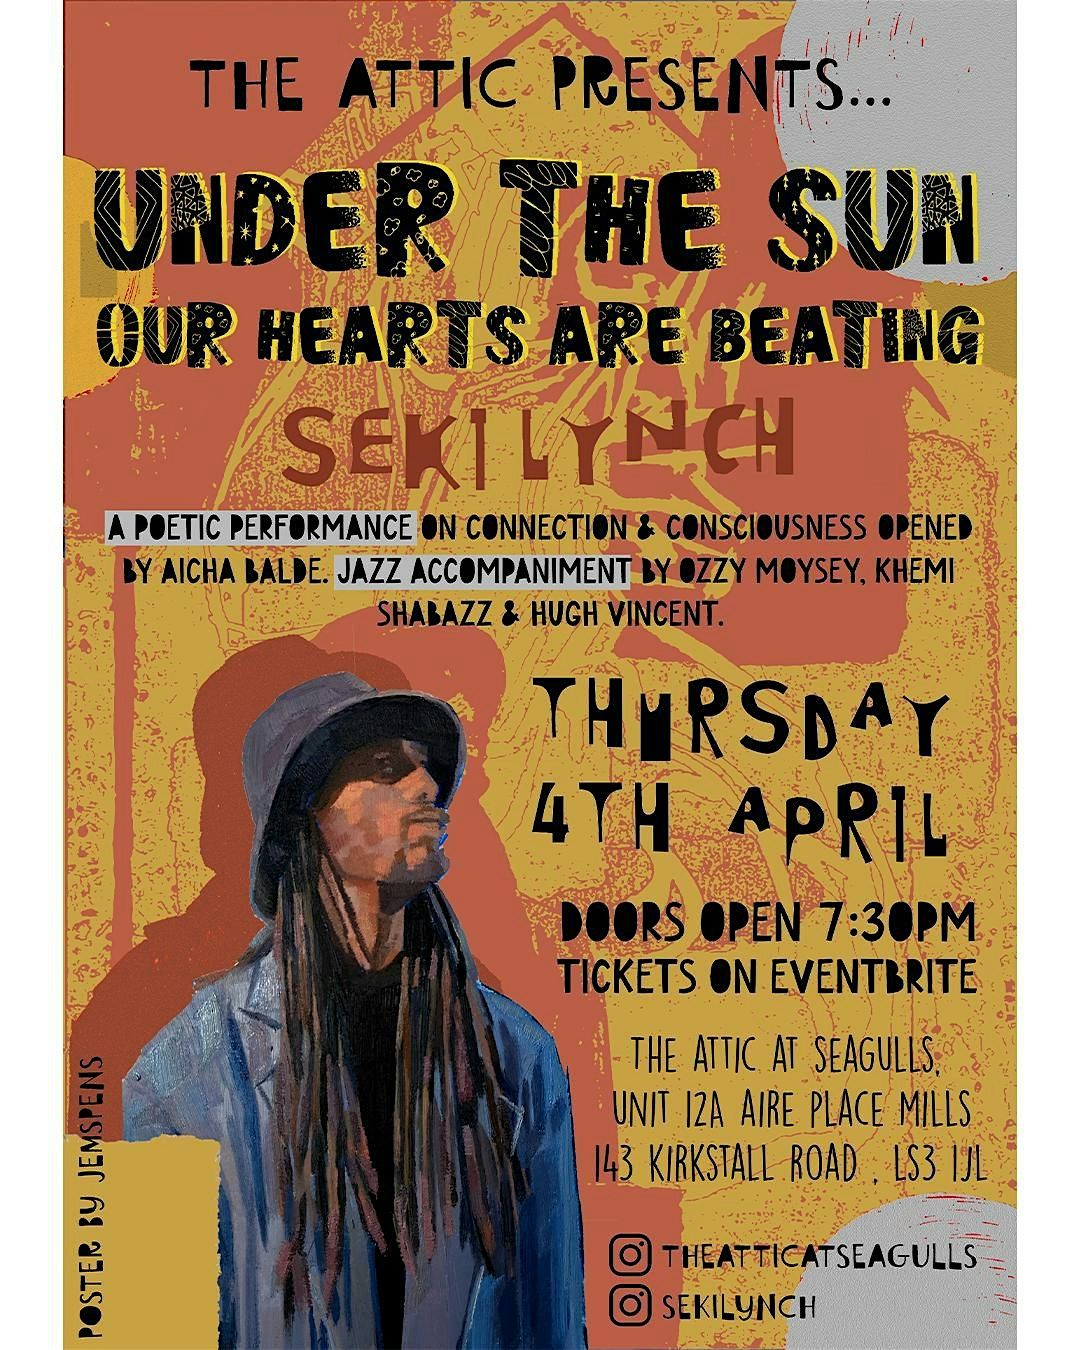 The Attic Presents 'Under The Sun Our Hearts Are Beating' with Seki Lynch